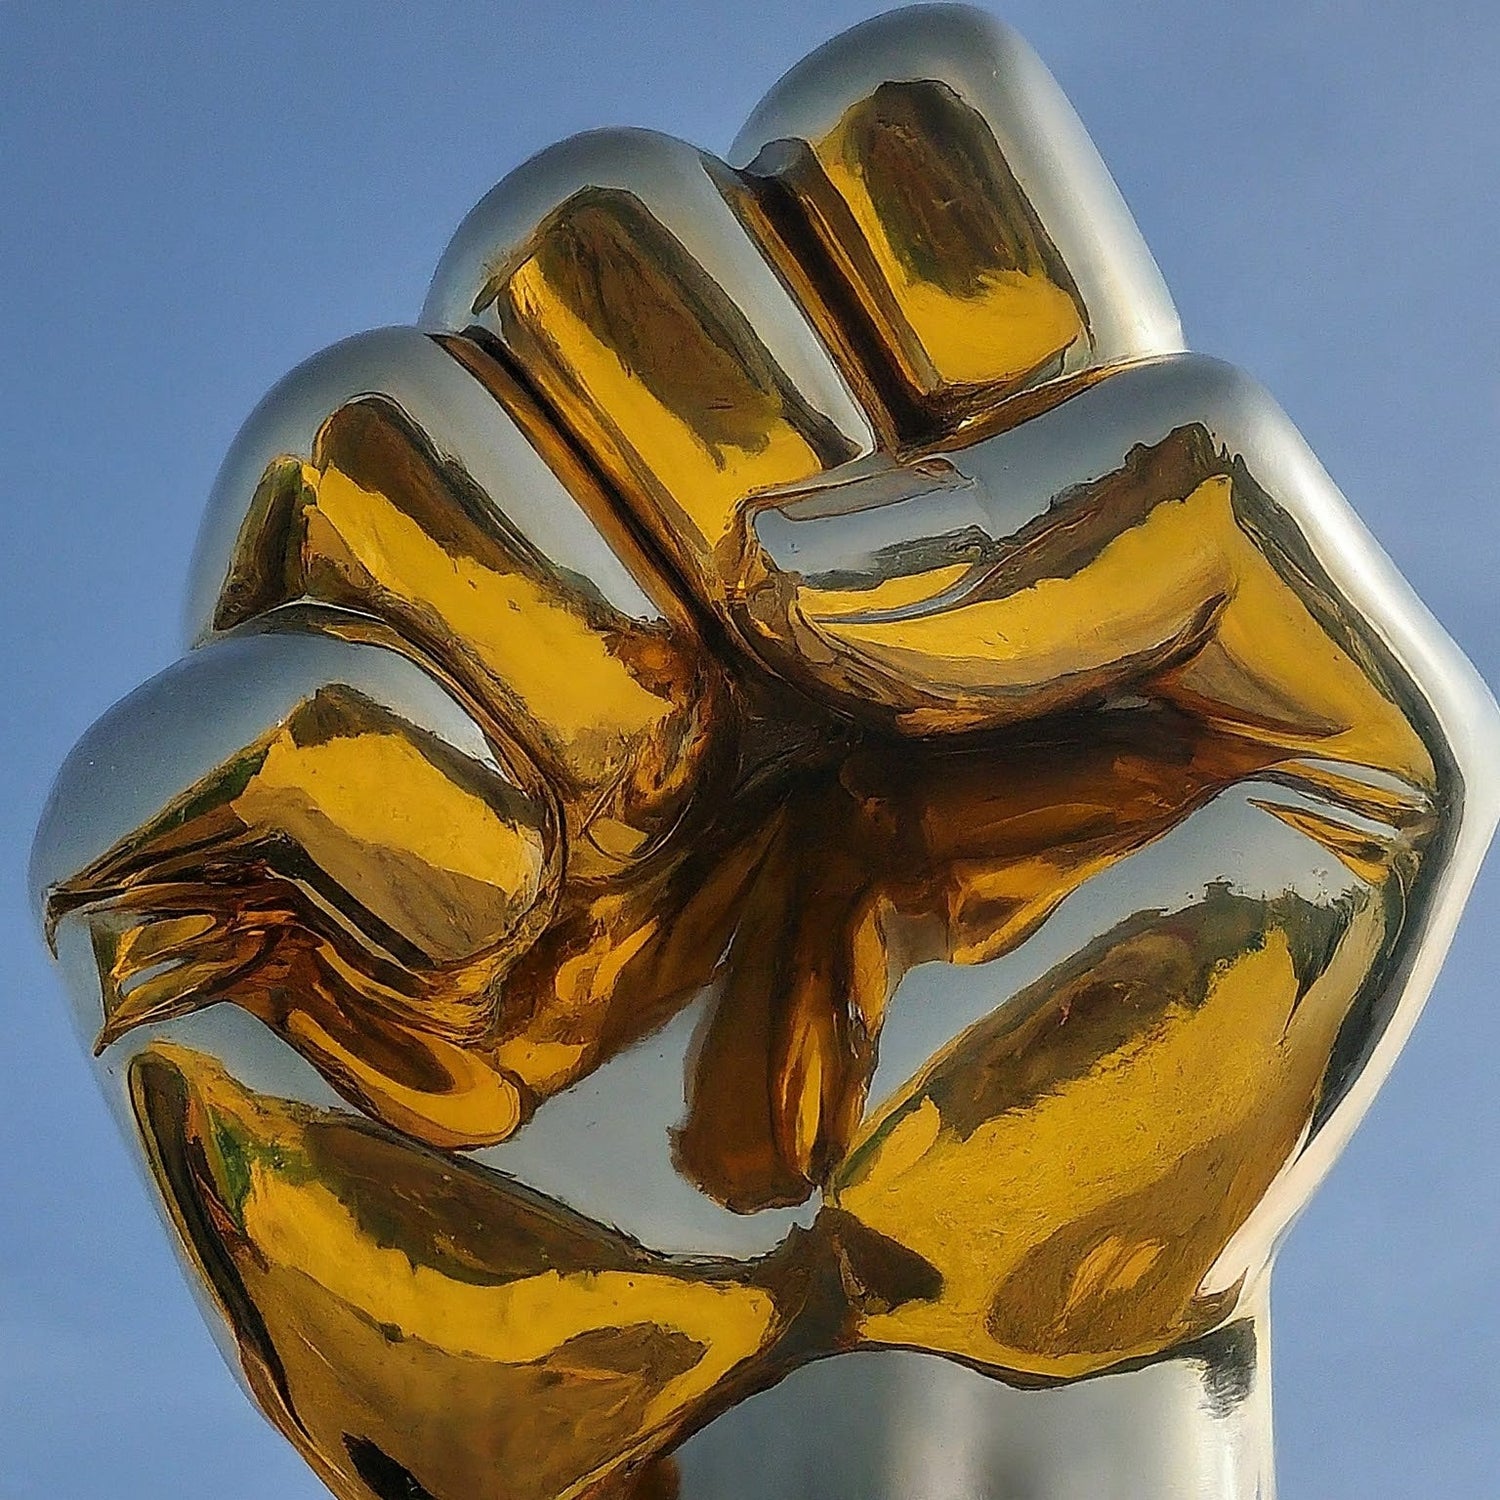 golden colored power fist against a sky blue background